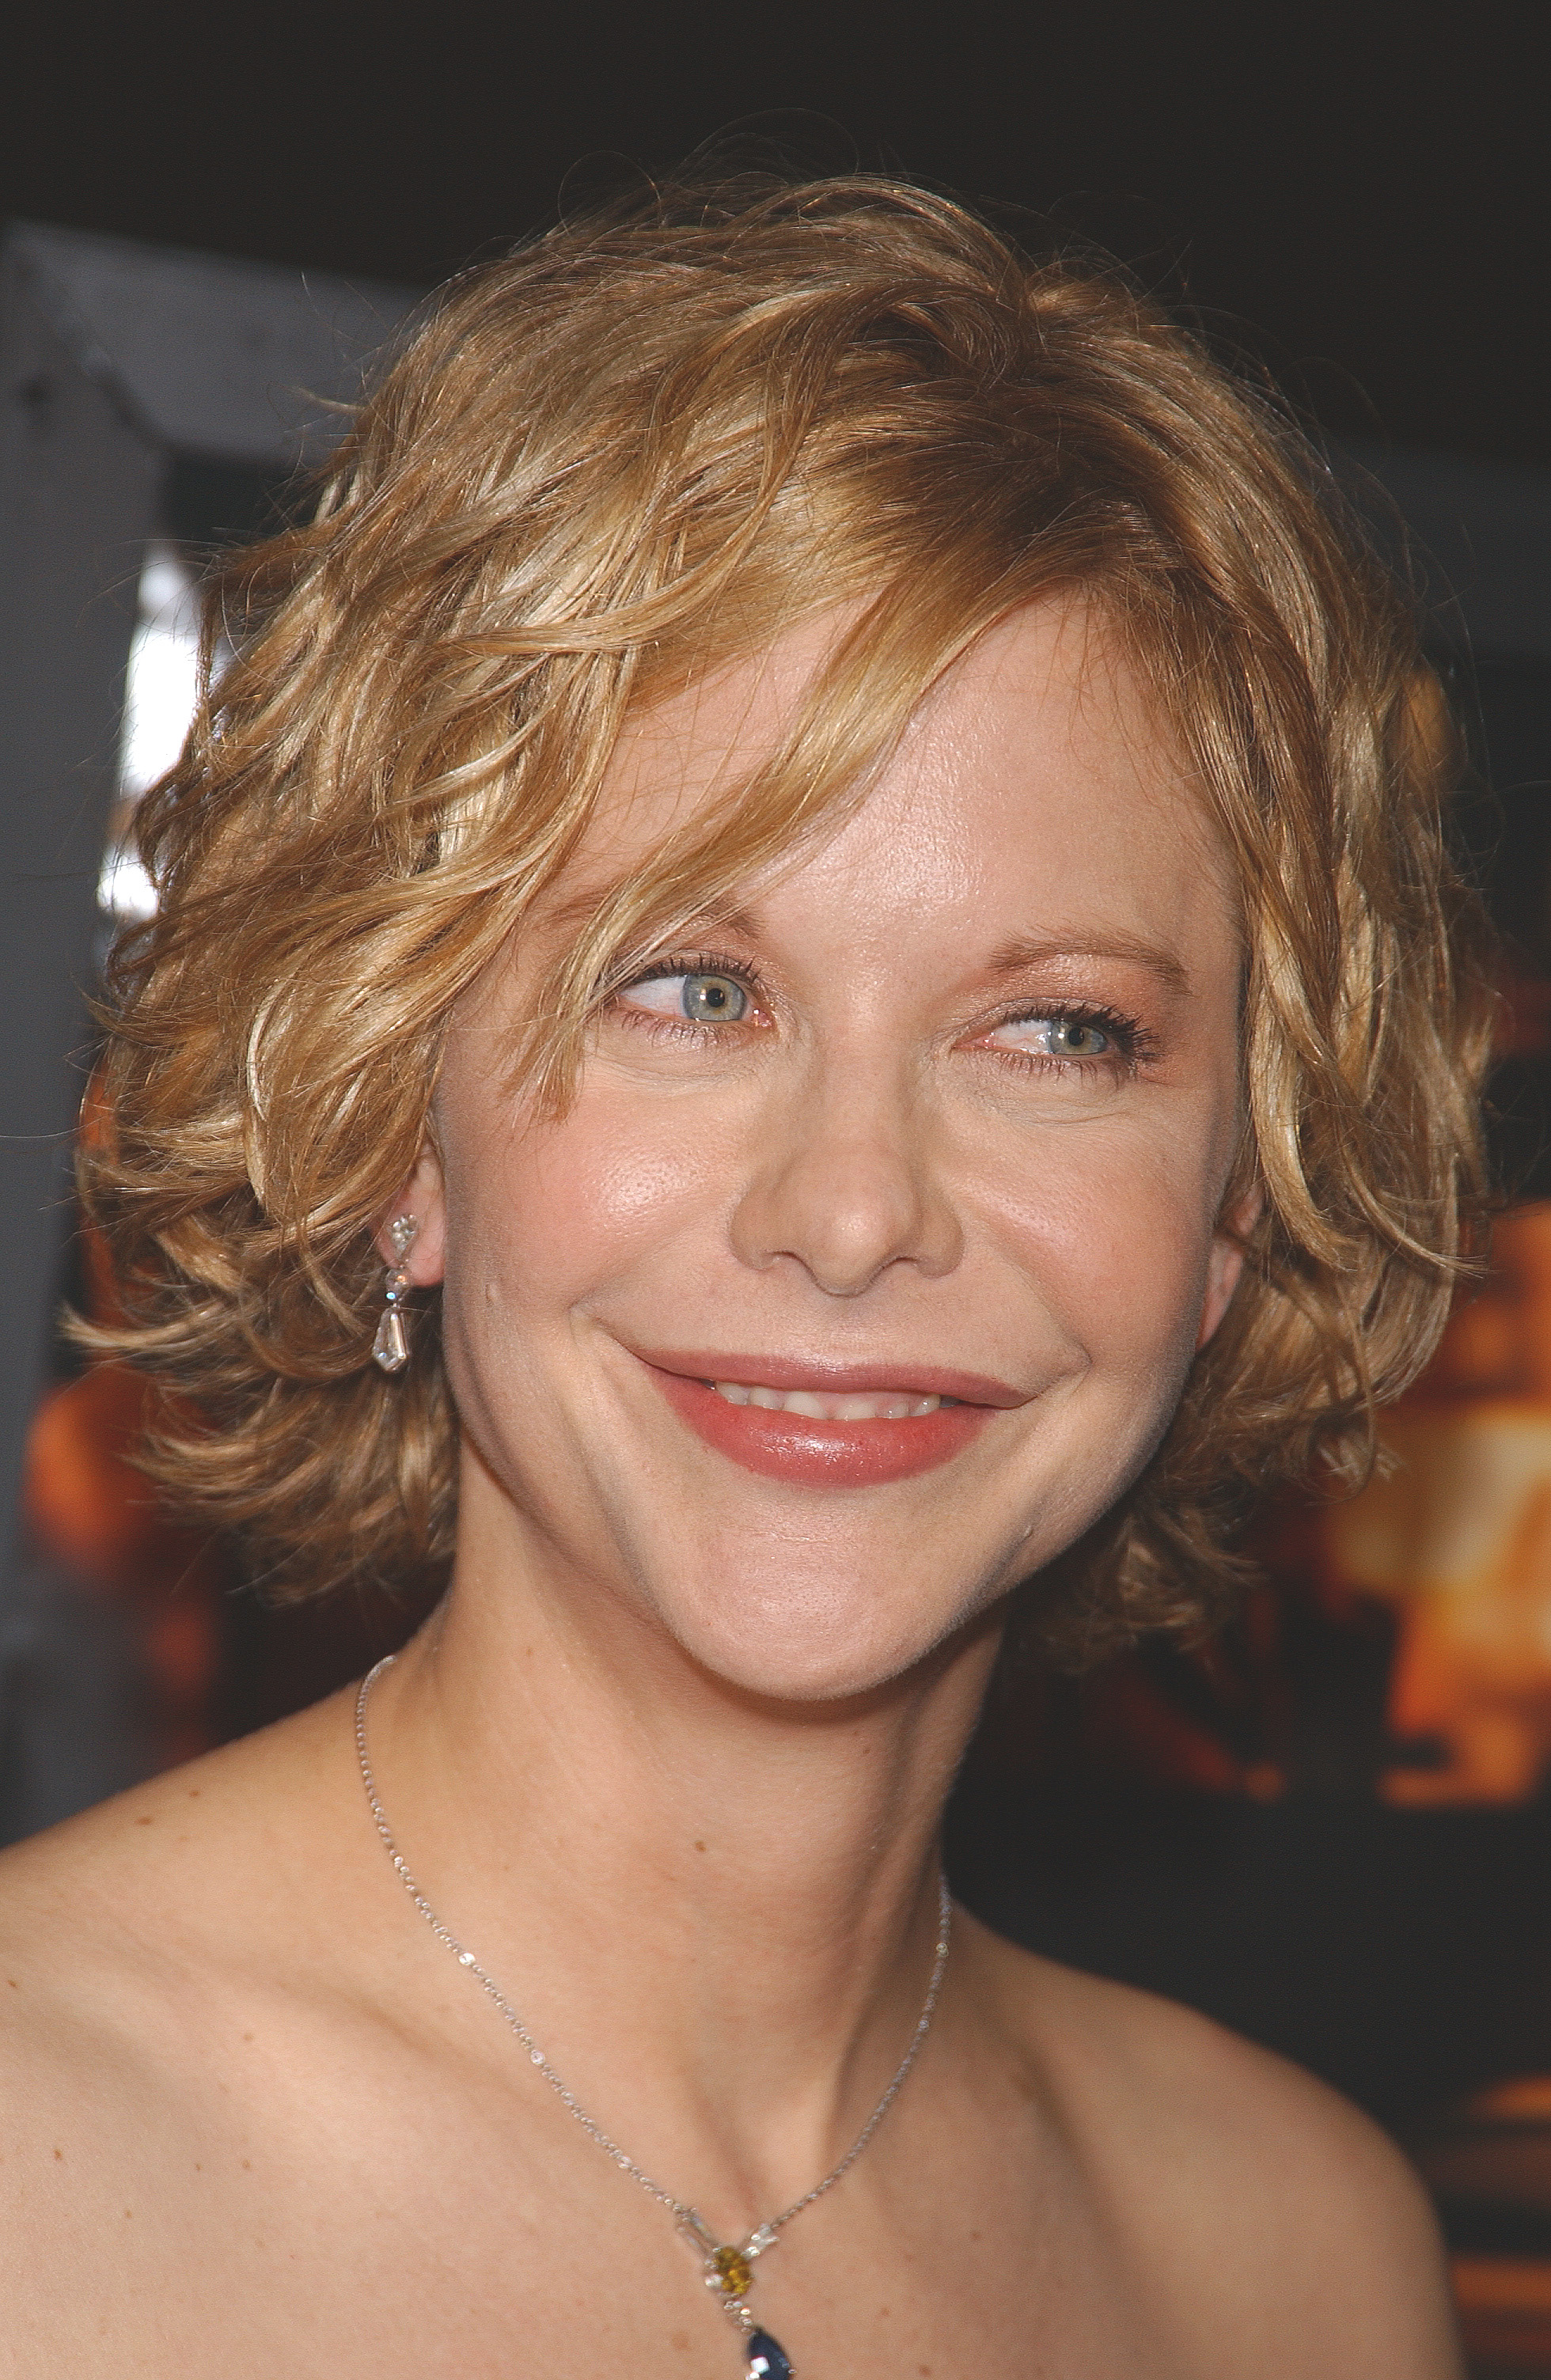 Meg Ryan at the premiere of "In The Cut," 2003 | Source: Getty Images